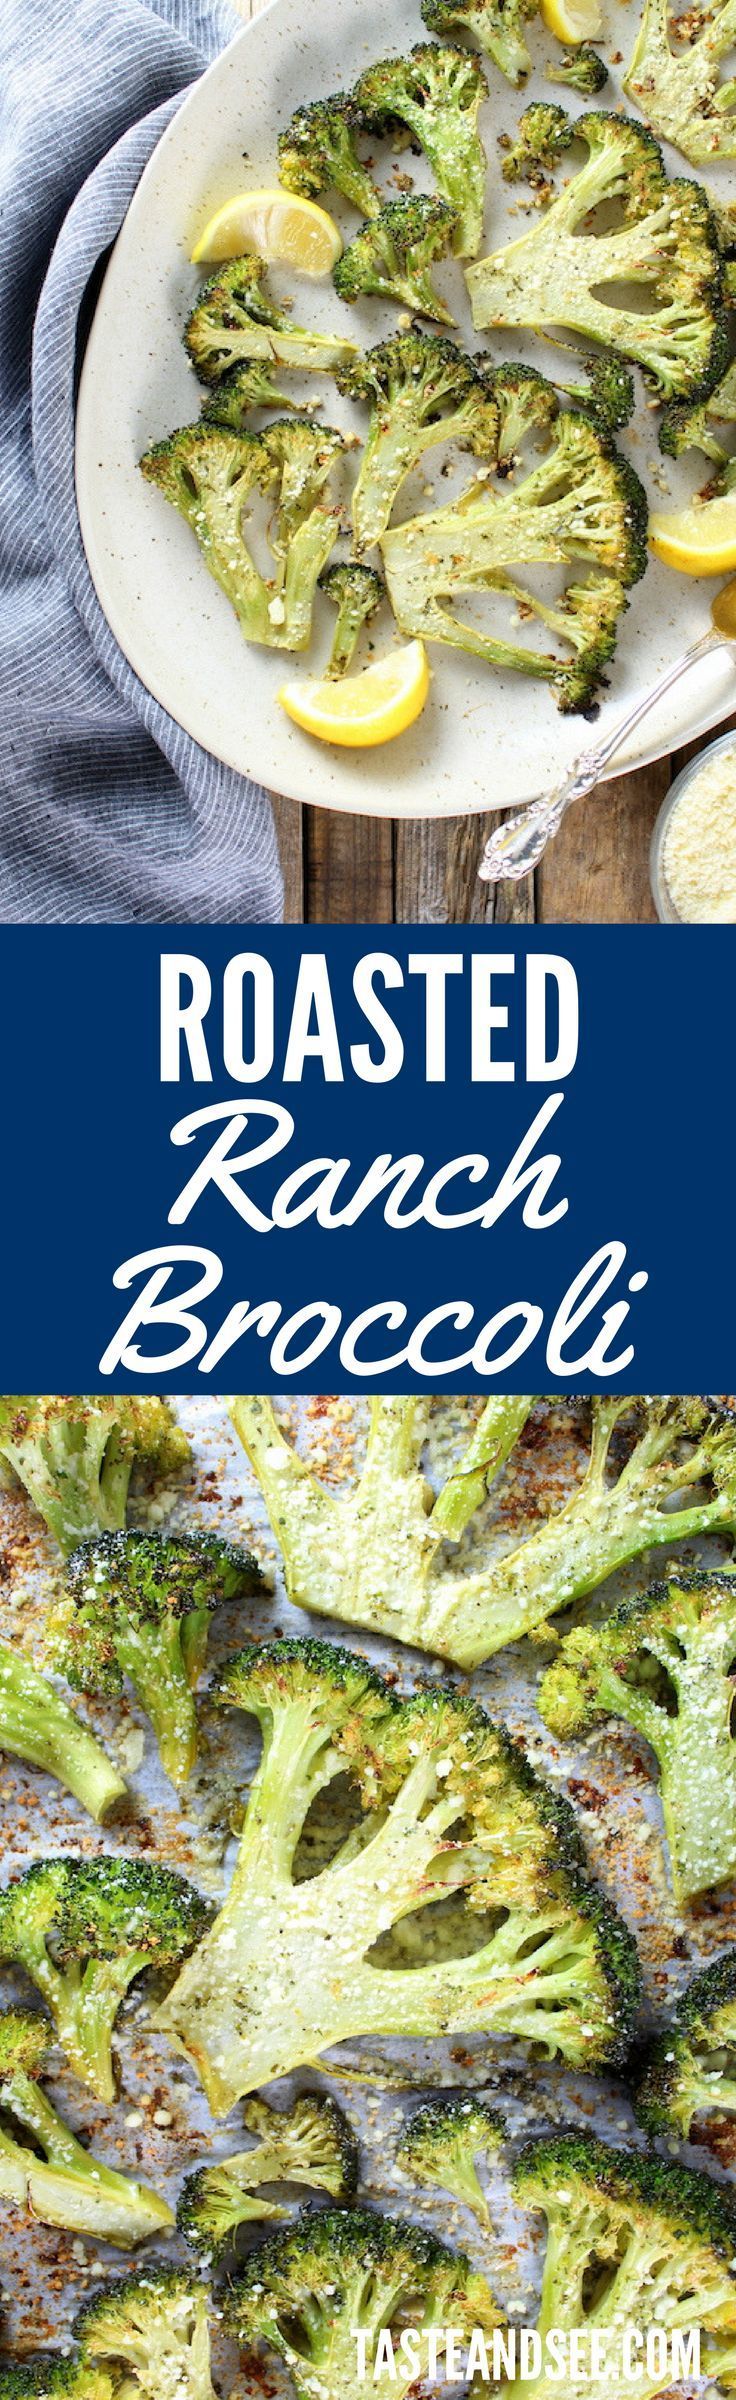 Roasted Ranch Broccoli with olive oil, lemon, & ranch seasoning… finished with parmesan cheese.  Super simple, healthy, & yummy!